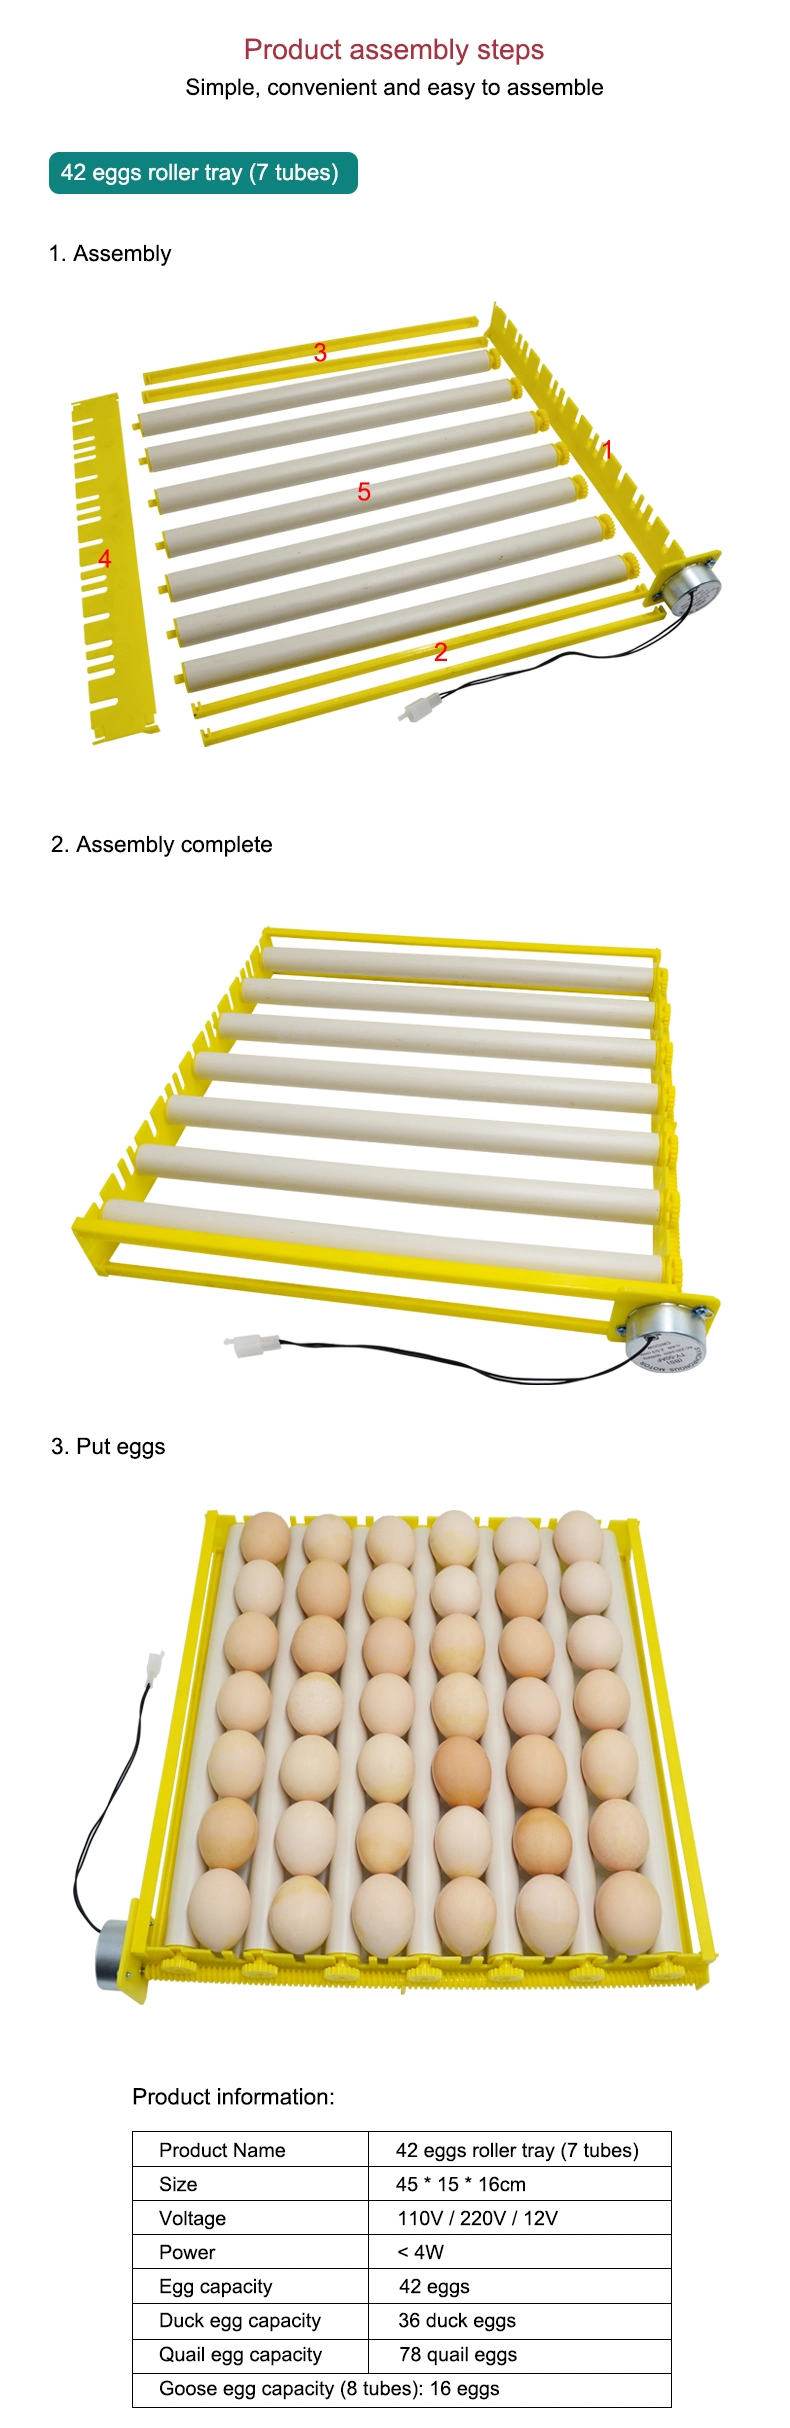 Multi-Functional Automatic Roller Egg Tray Hatching All Kinds of Eggs